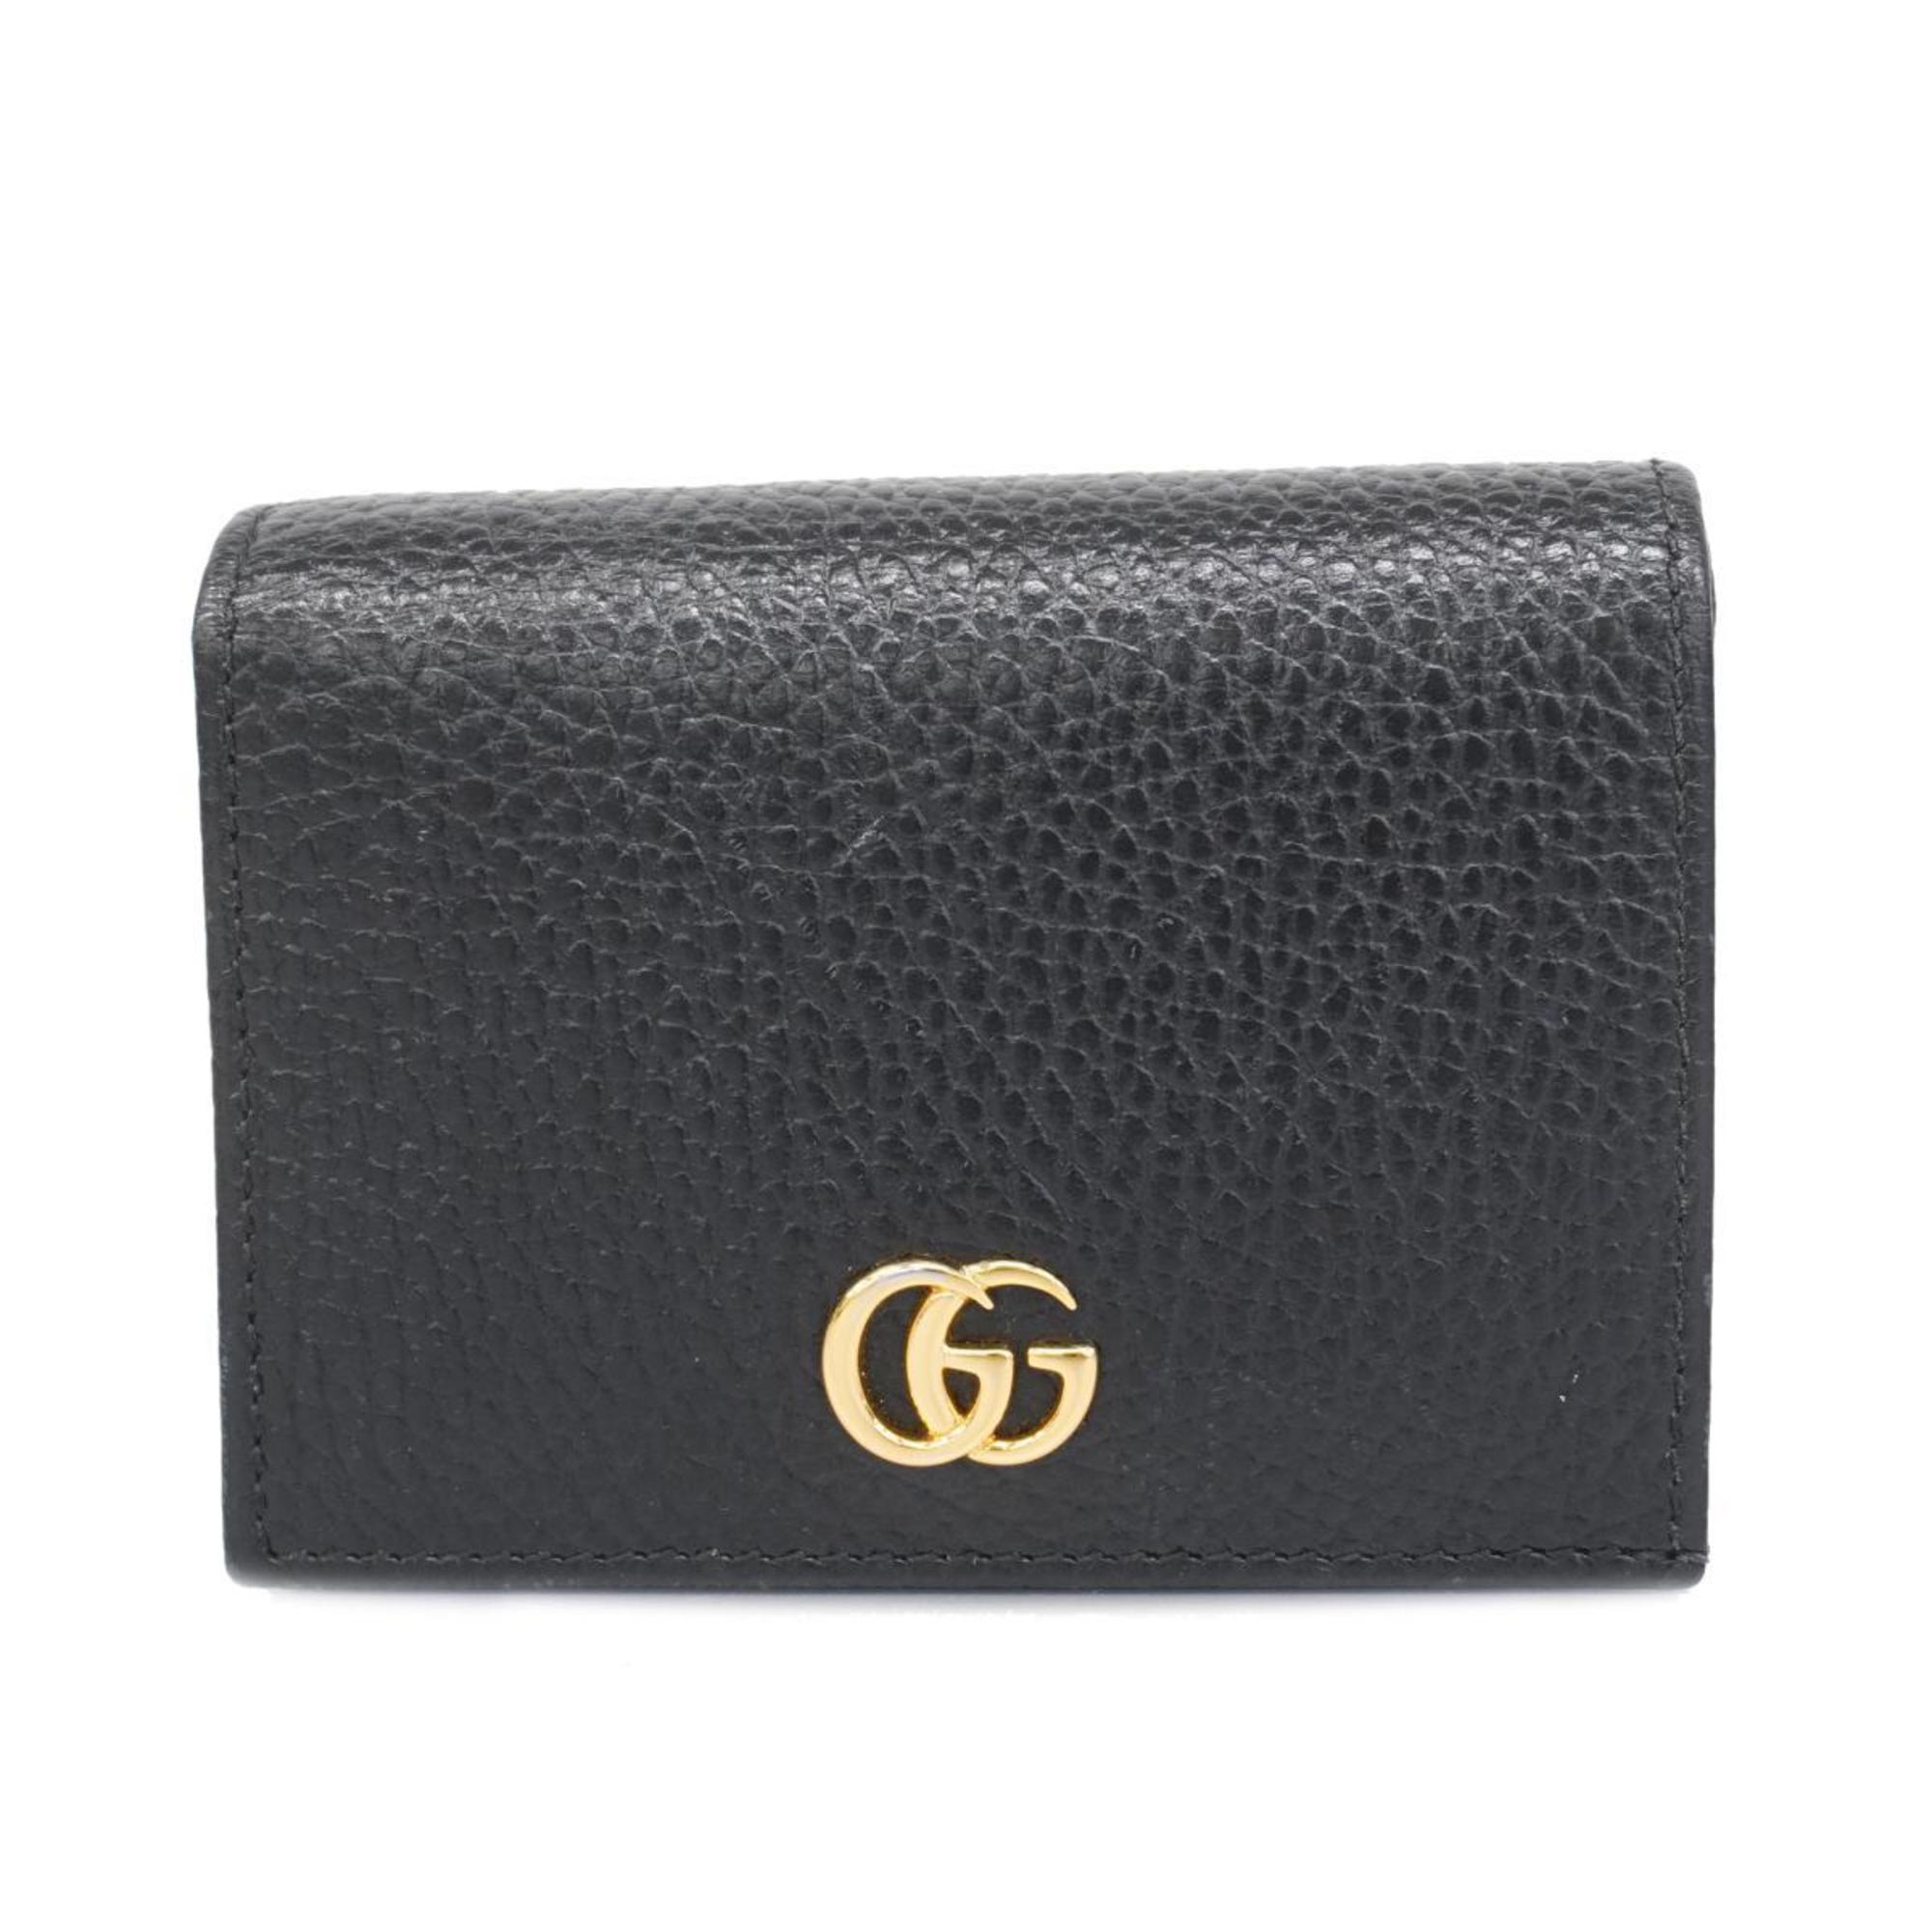 Gucci Wallet GG Marmont 456126 Leather Black Women's